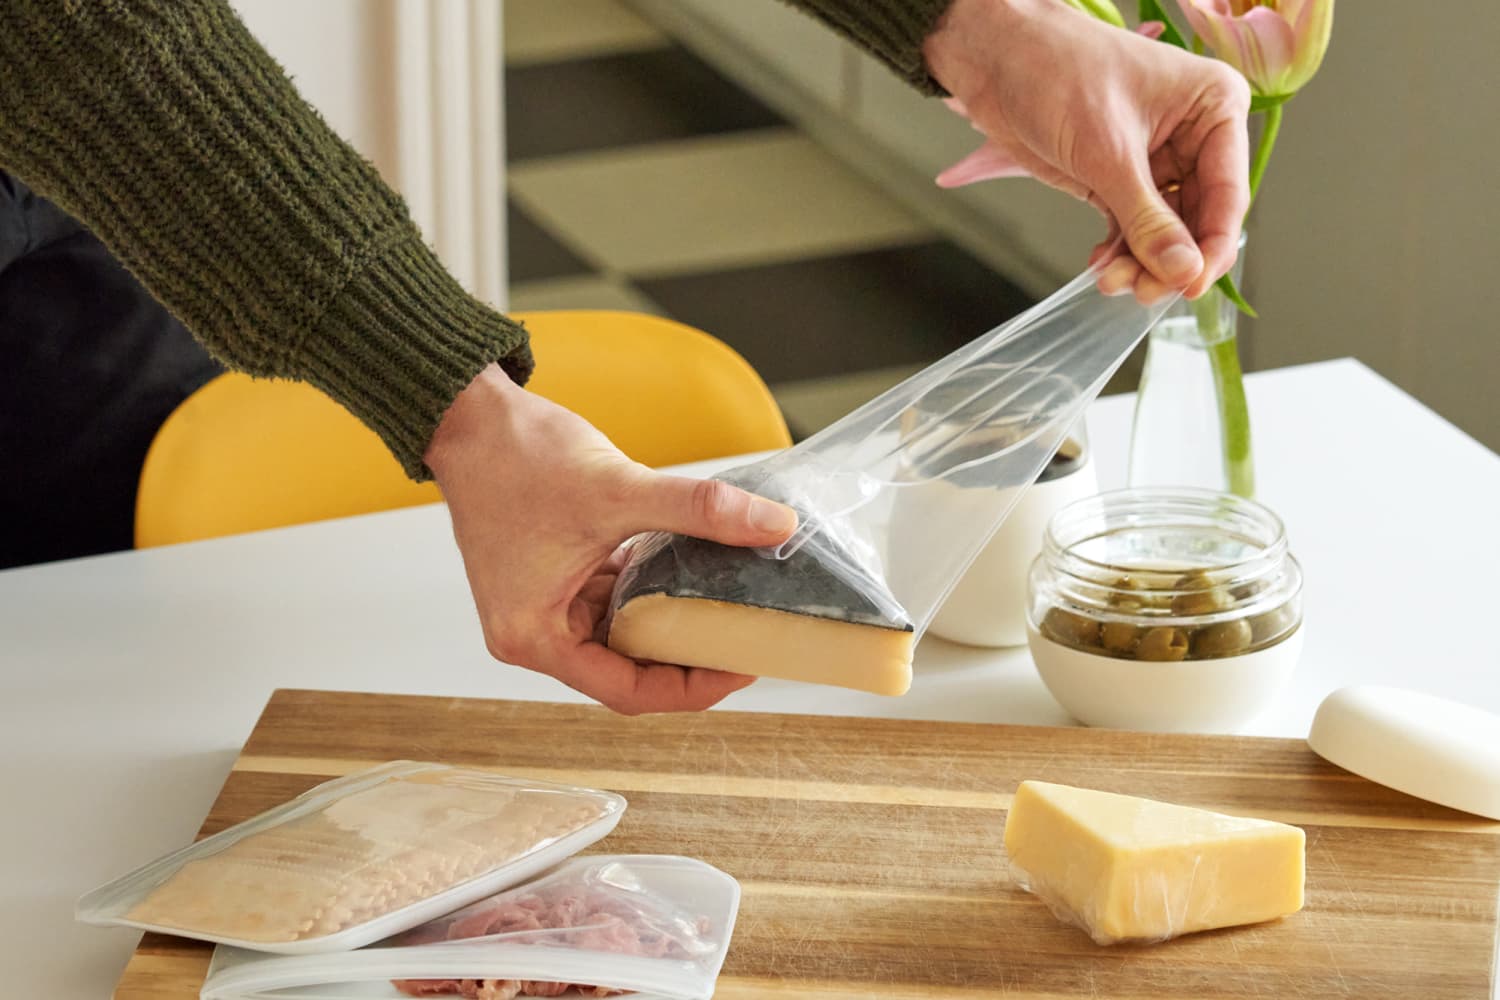 The Ingenious Reusable Stretch Wrap That’ll Make You Ditch Plastic and Foil for Good (and Save You Money!)